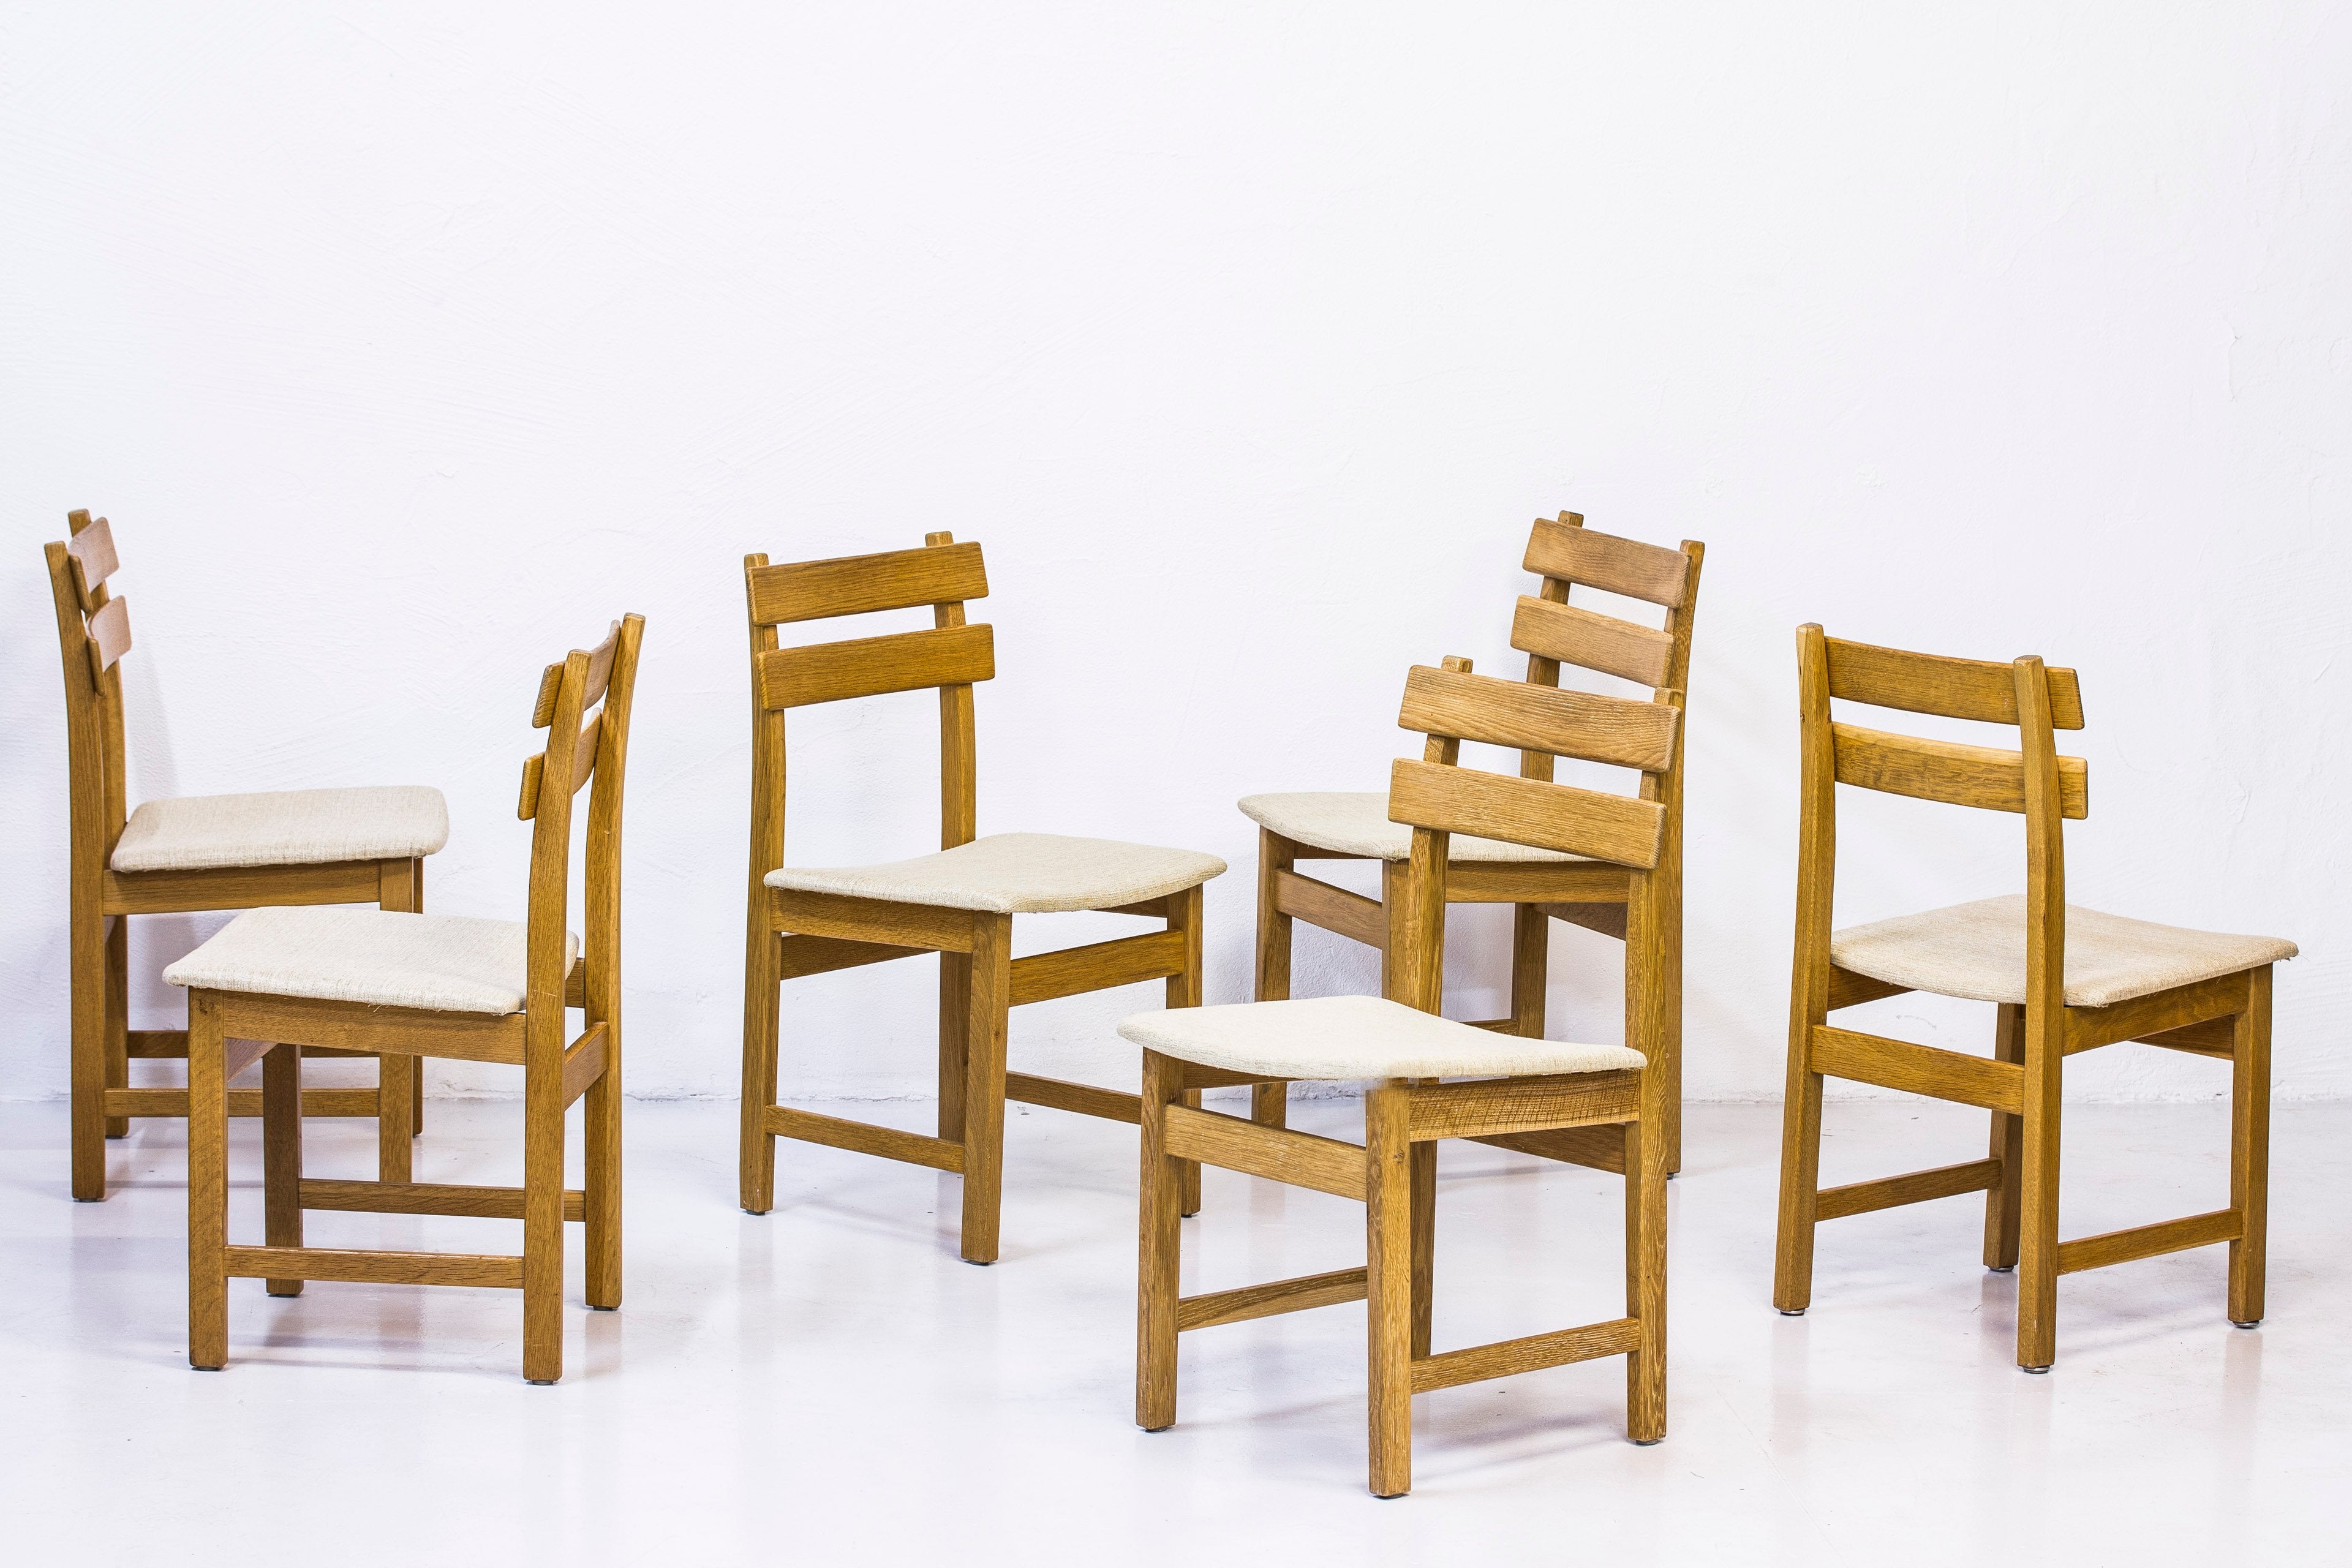 1960s "Singö" oak chairs by Carl Gustaf Boulogner